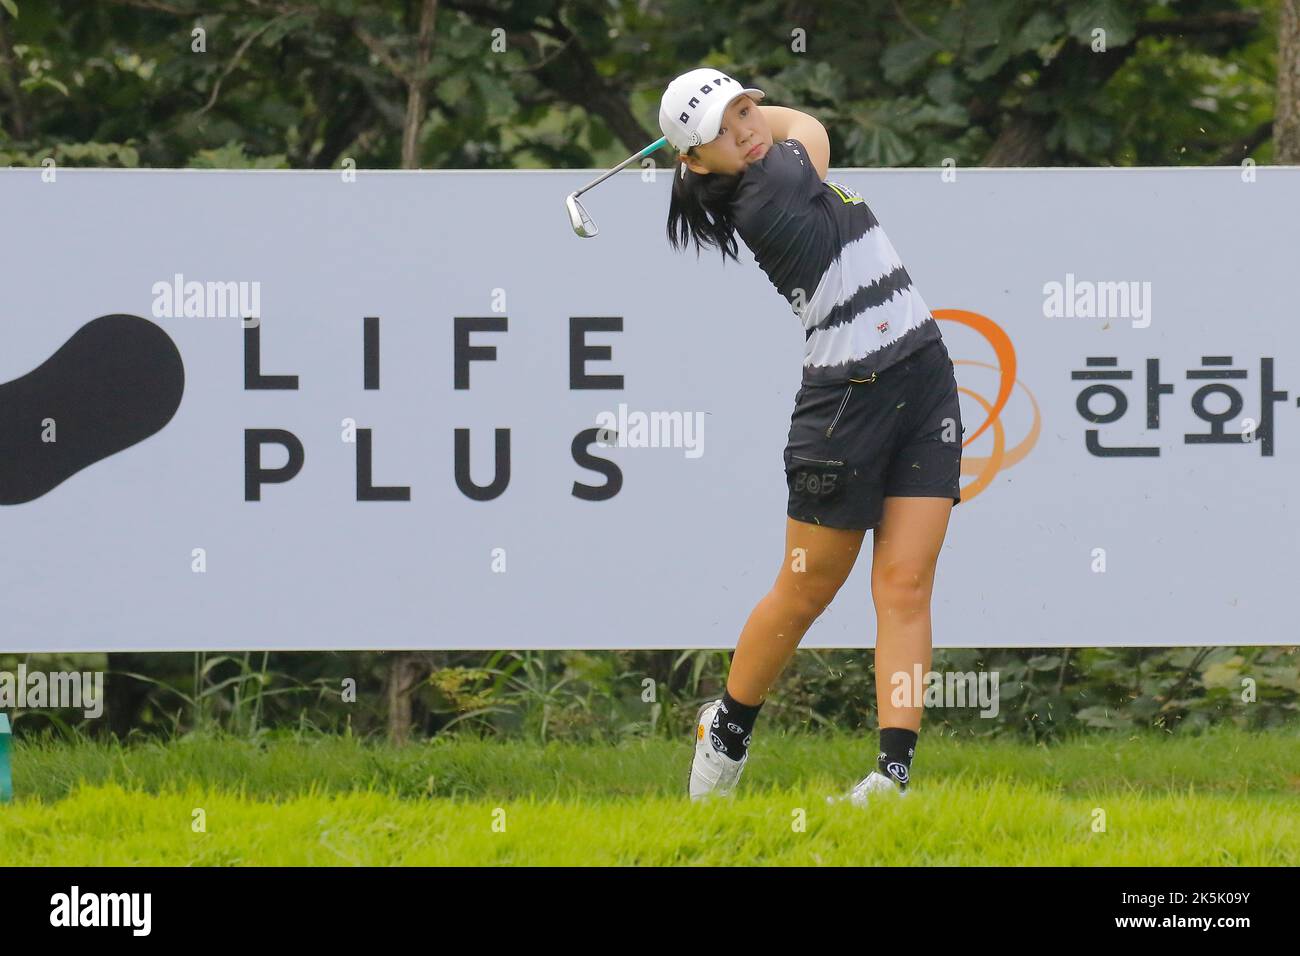 Aug 26, 2022-Chuncheon, South Korea-Lee Je Yeong action on the 5th hall during an Hanhwa Classic 2022 Round 2 at Jade Palace Golf Club in Chun Cheon, South Korea. Stock Photo